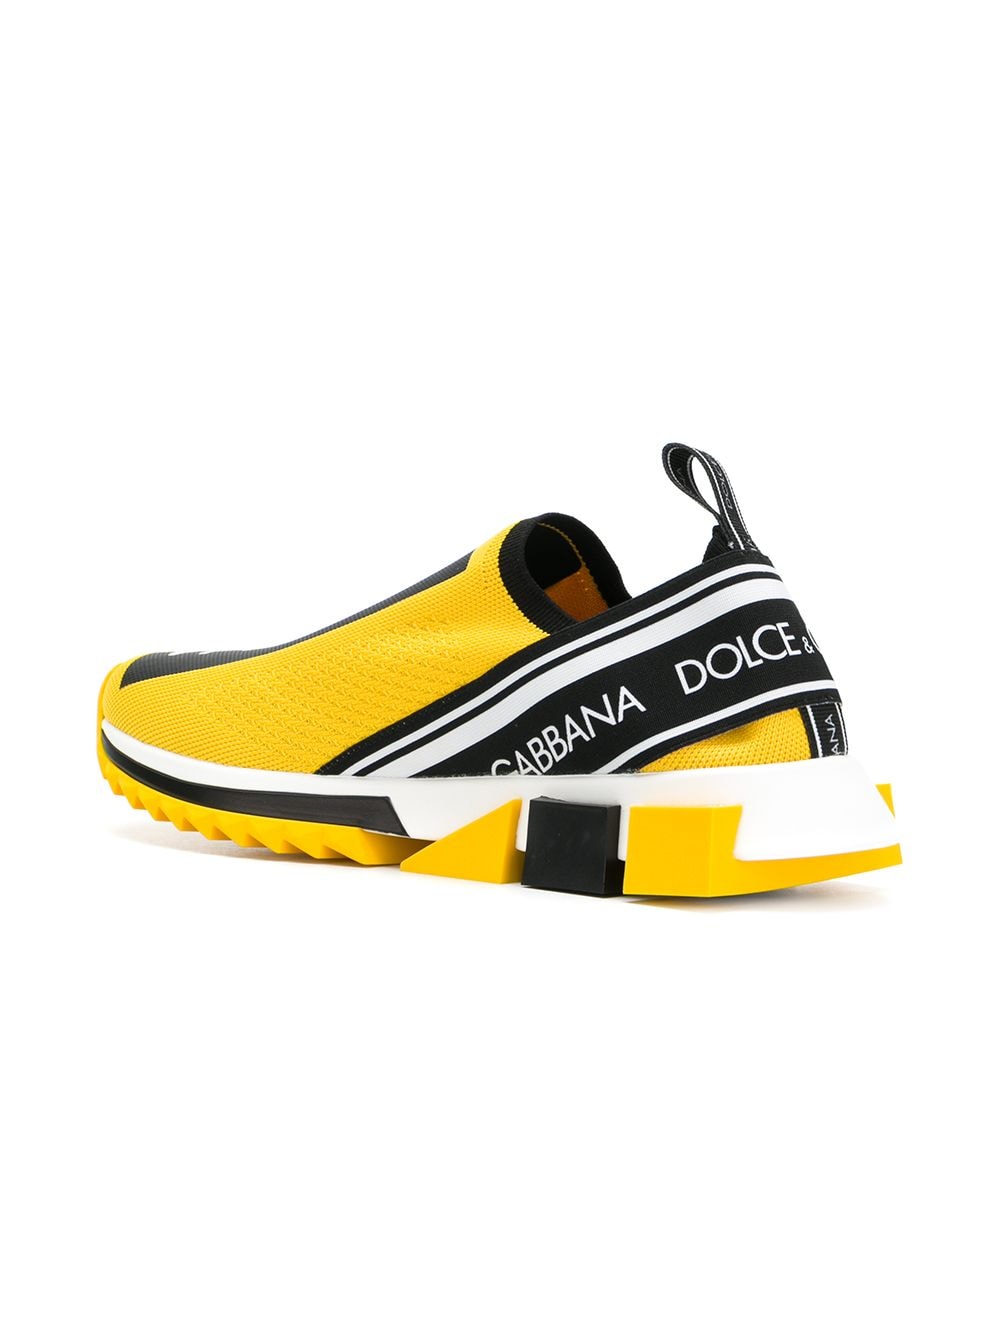 dolce and gabbana yellow sneakers